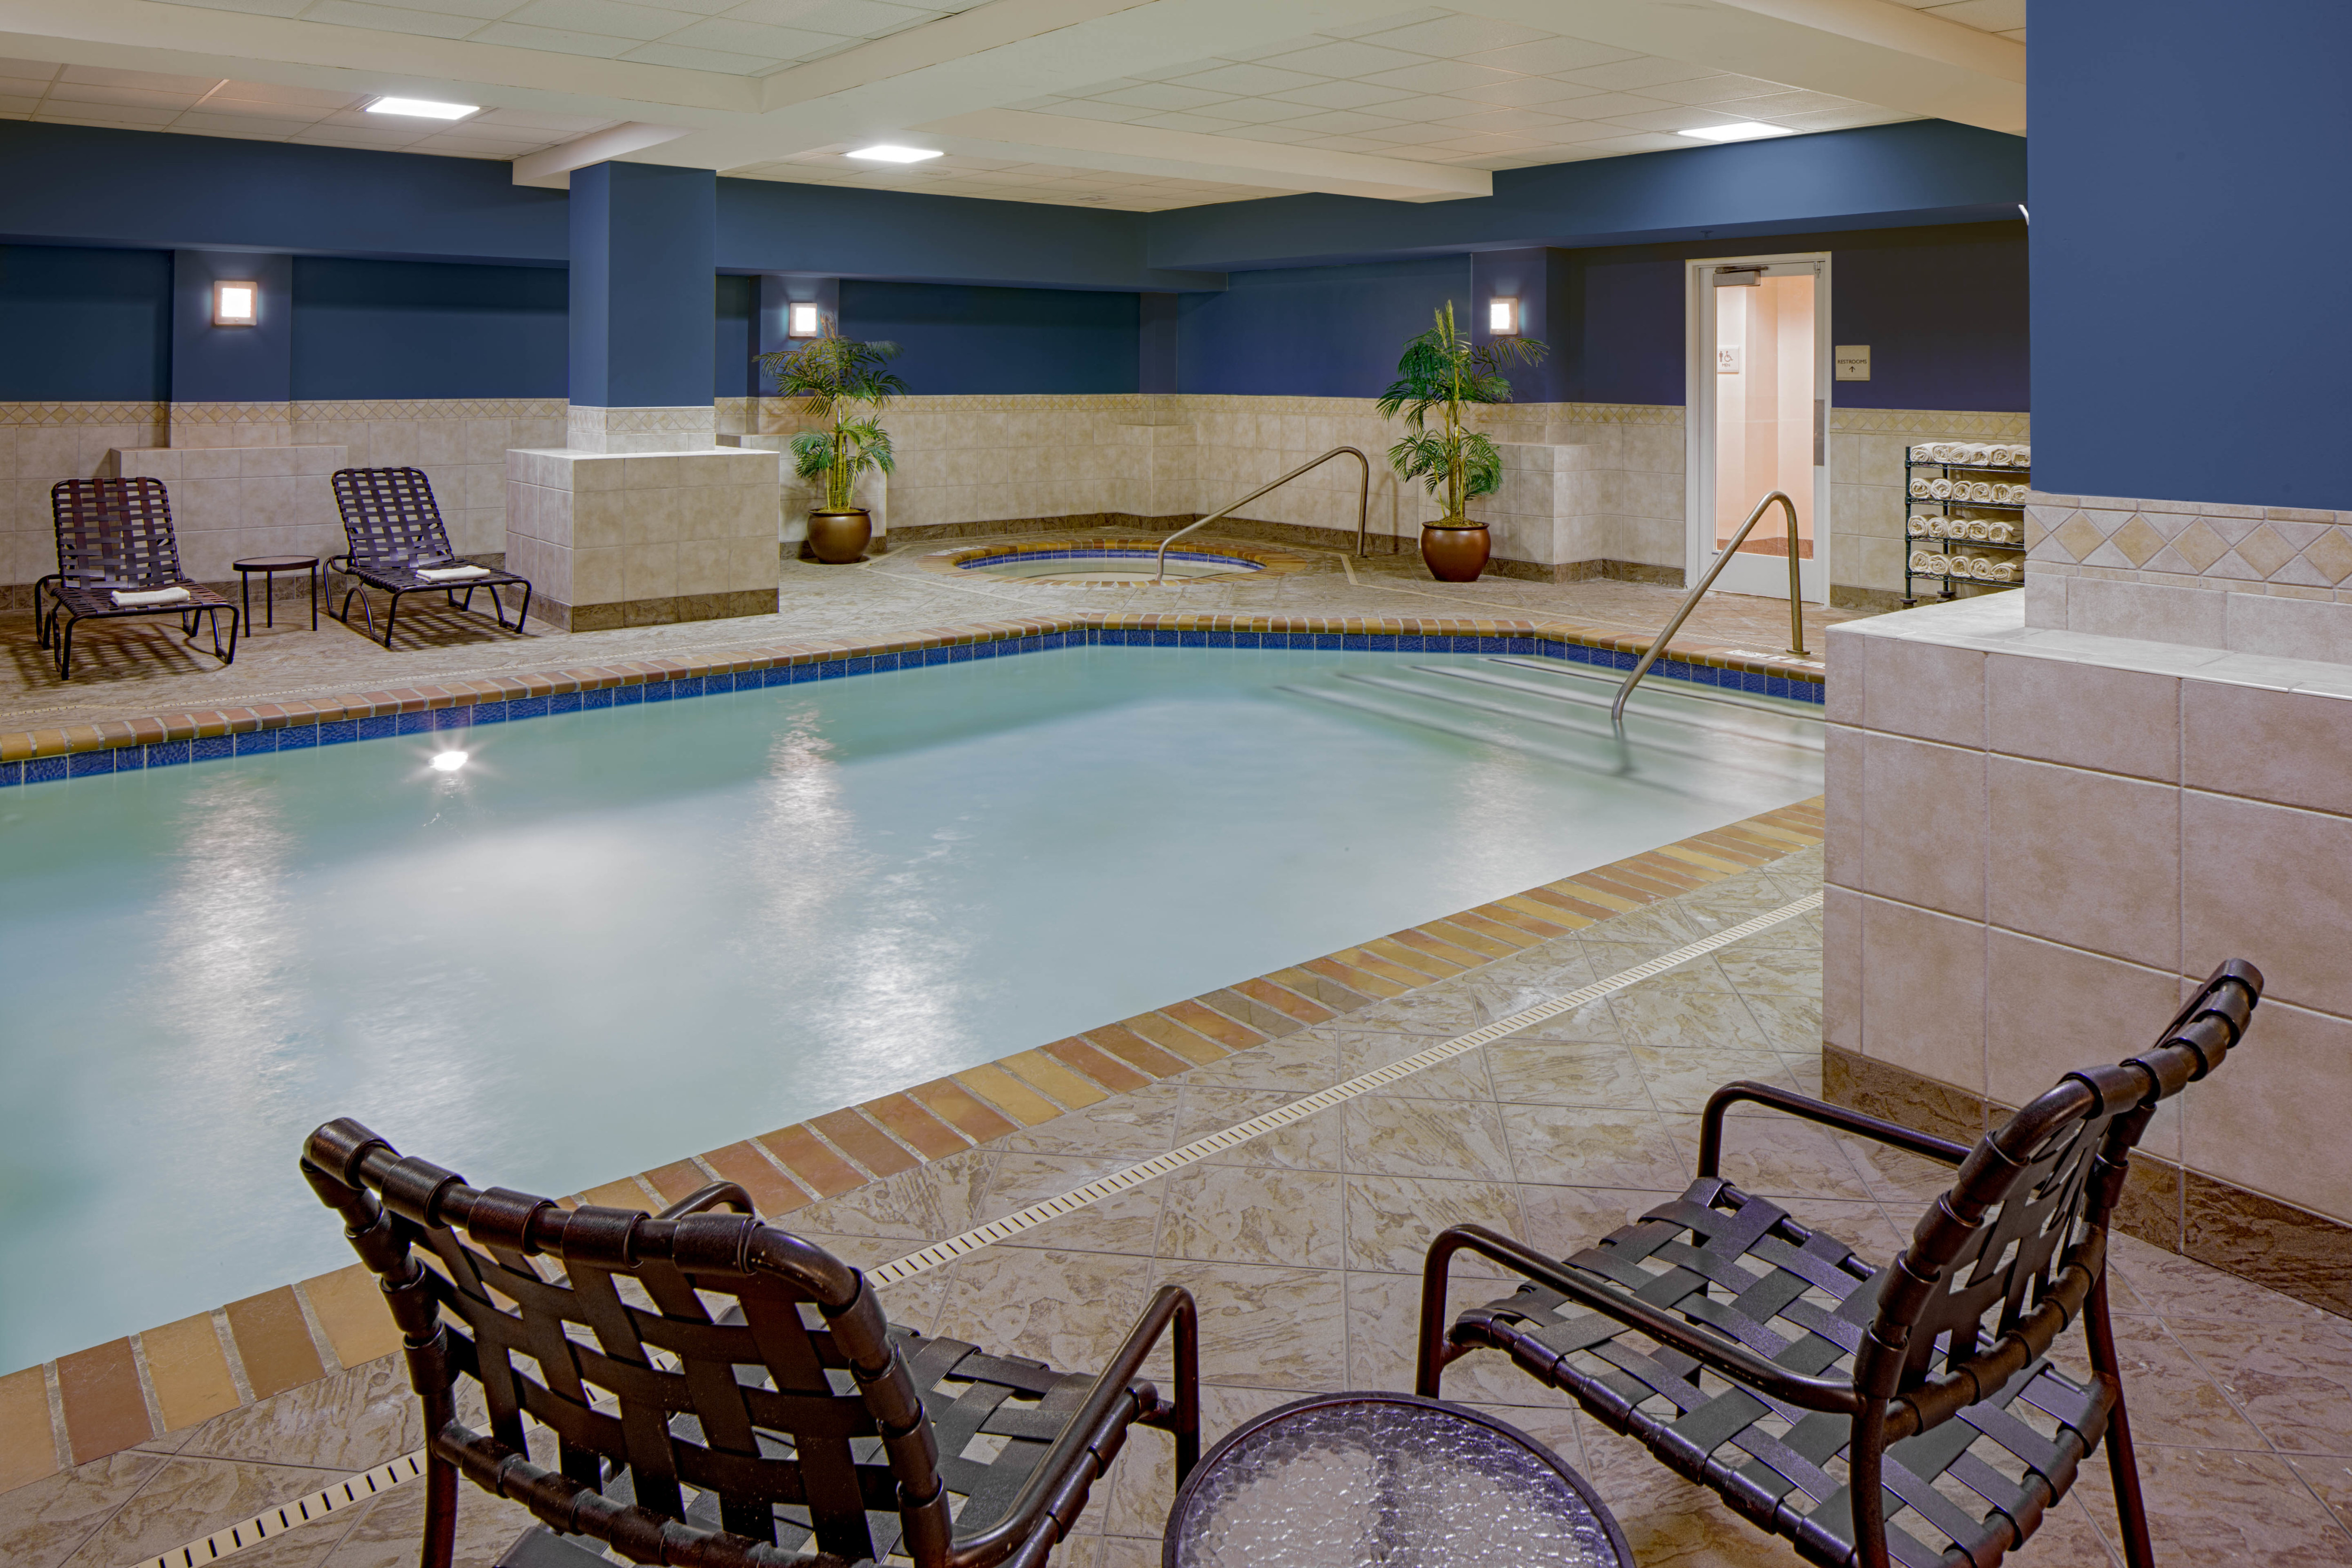 Indoor Pool Area with seating